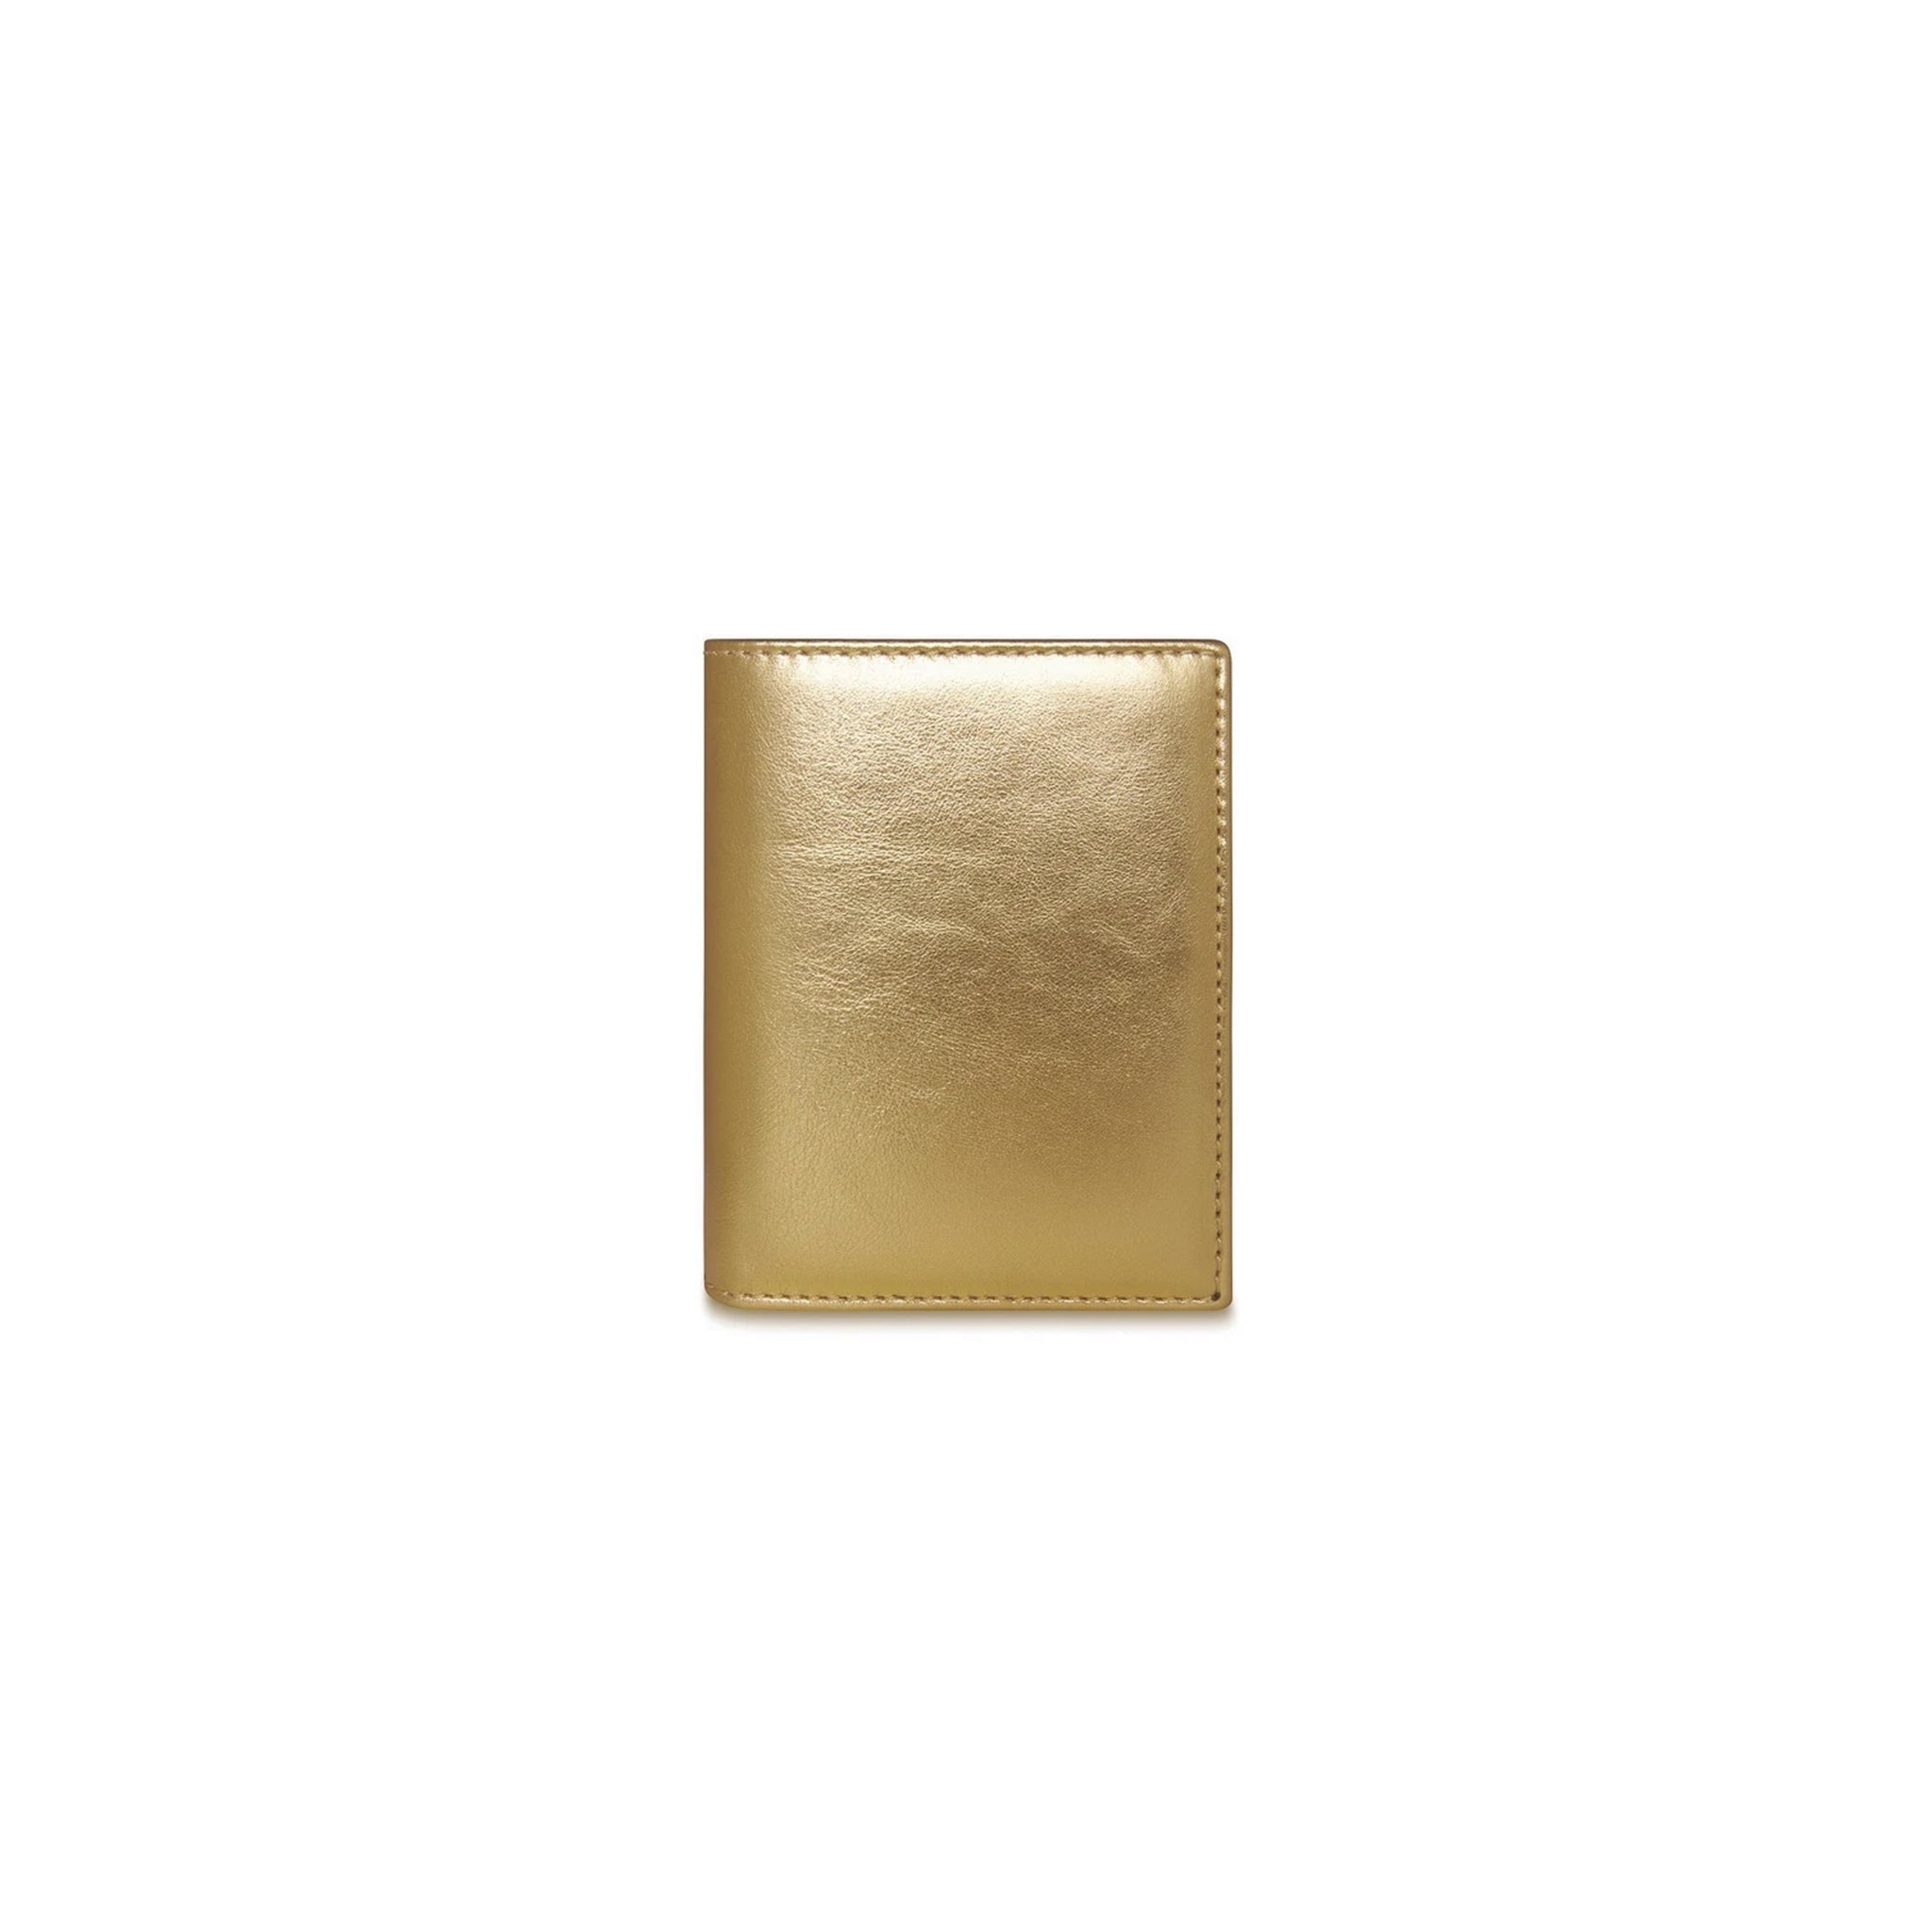 Gold and Silver Group Wallet 0641GSG